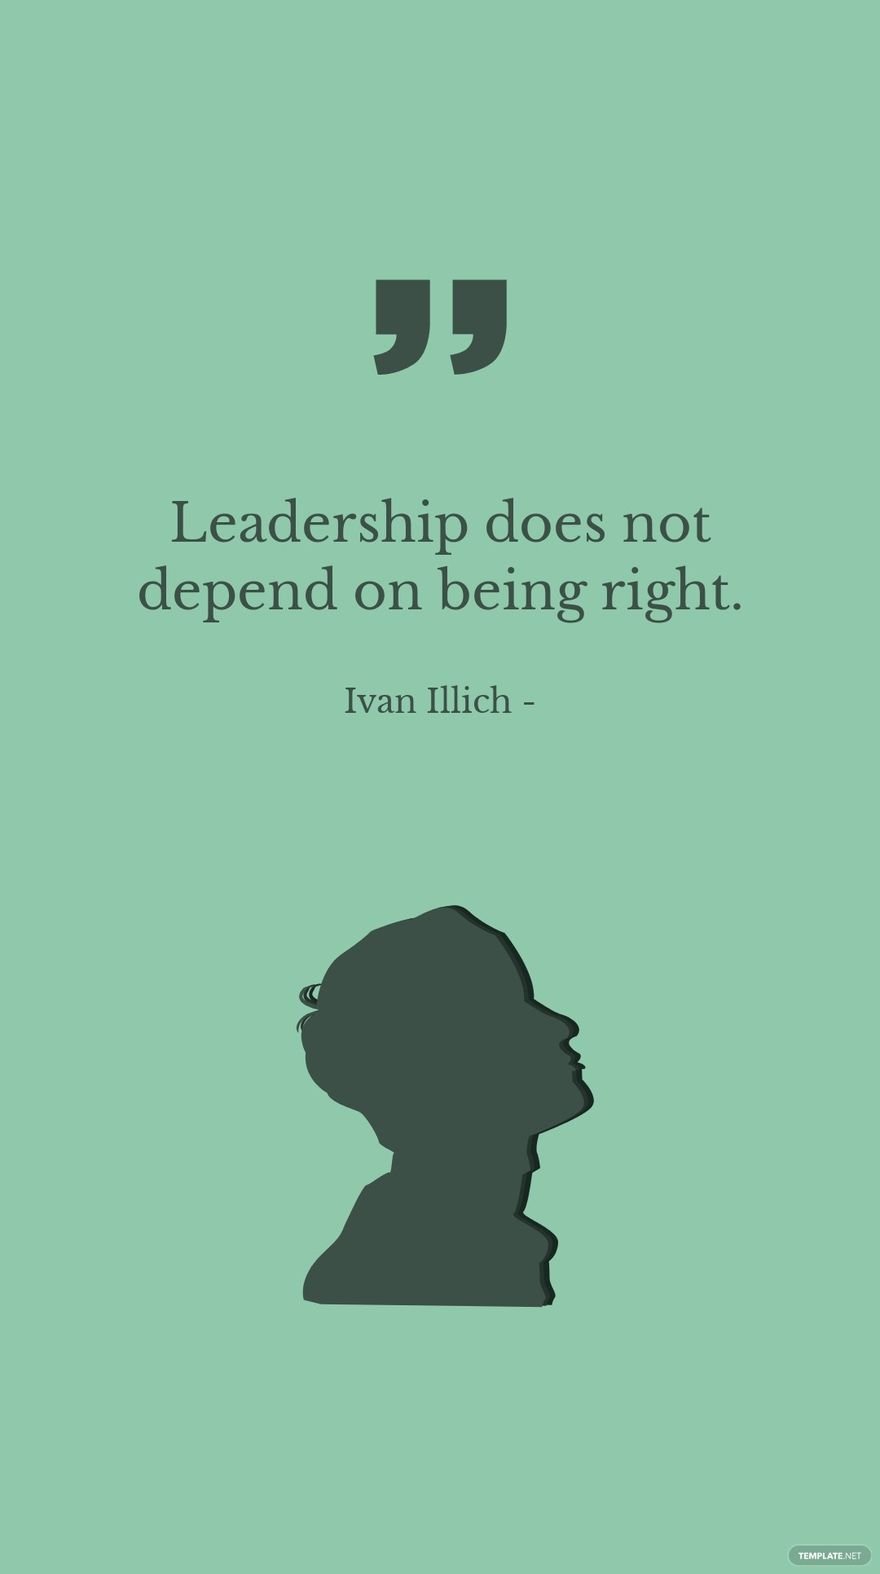 Free Ivan Illich - Leadership does not depend on being right. in JPG